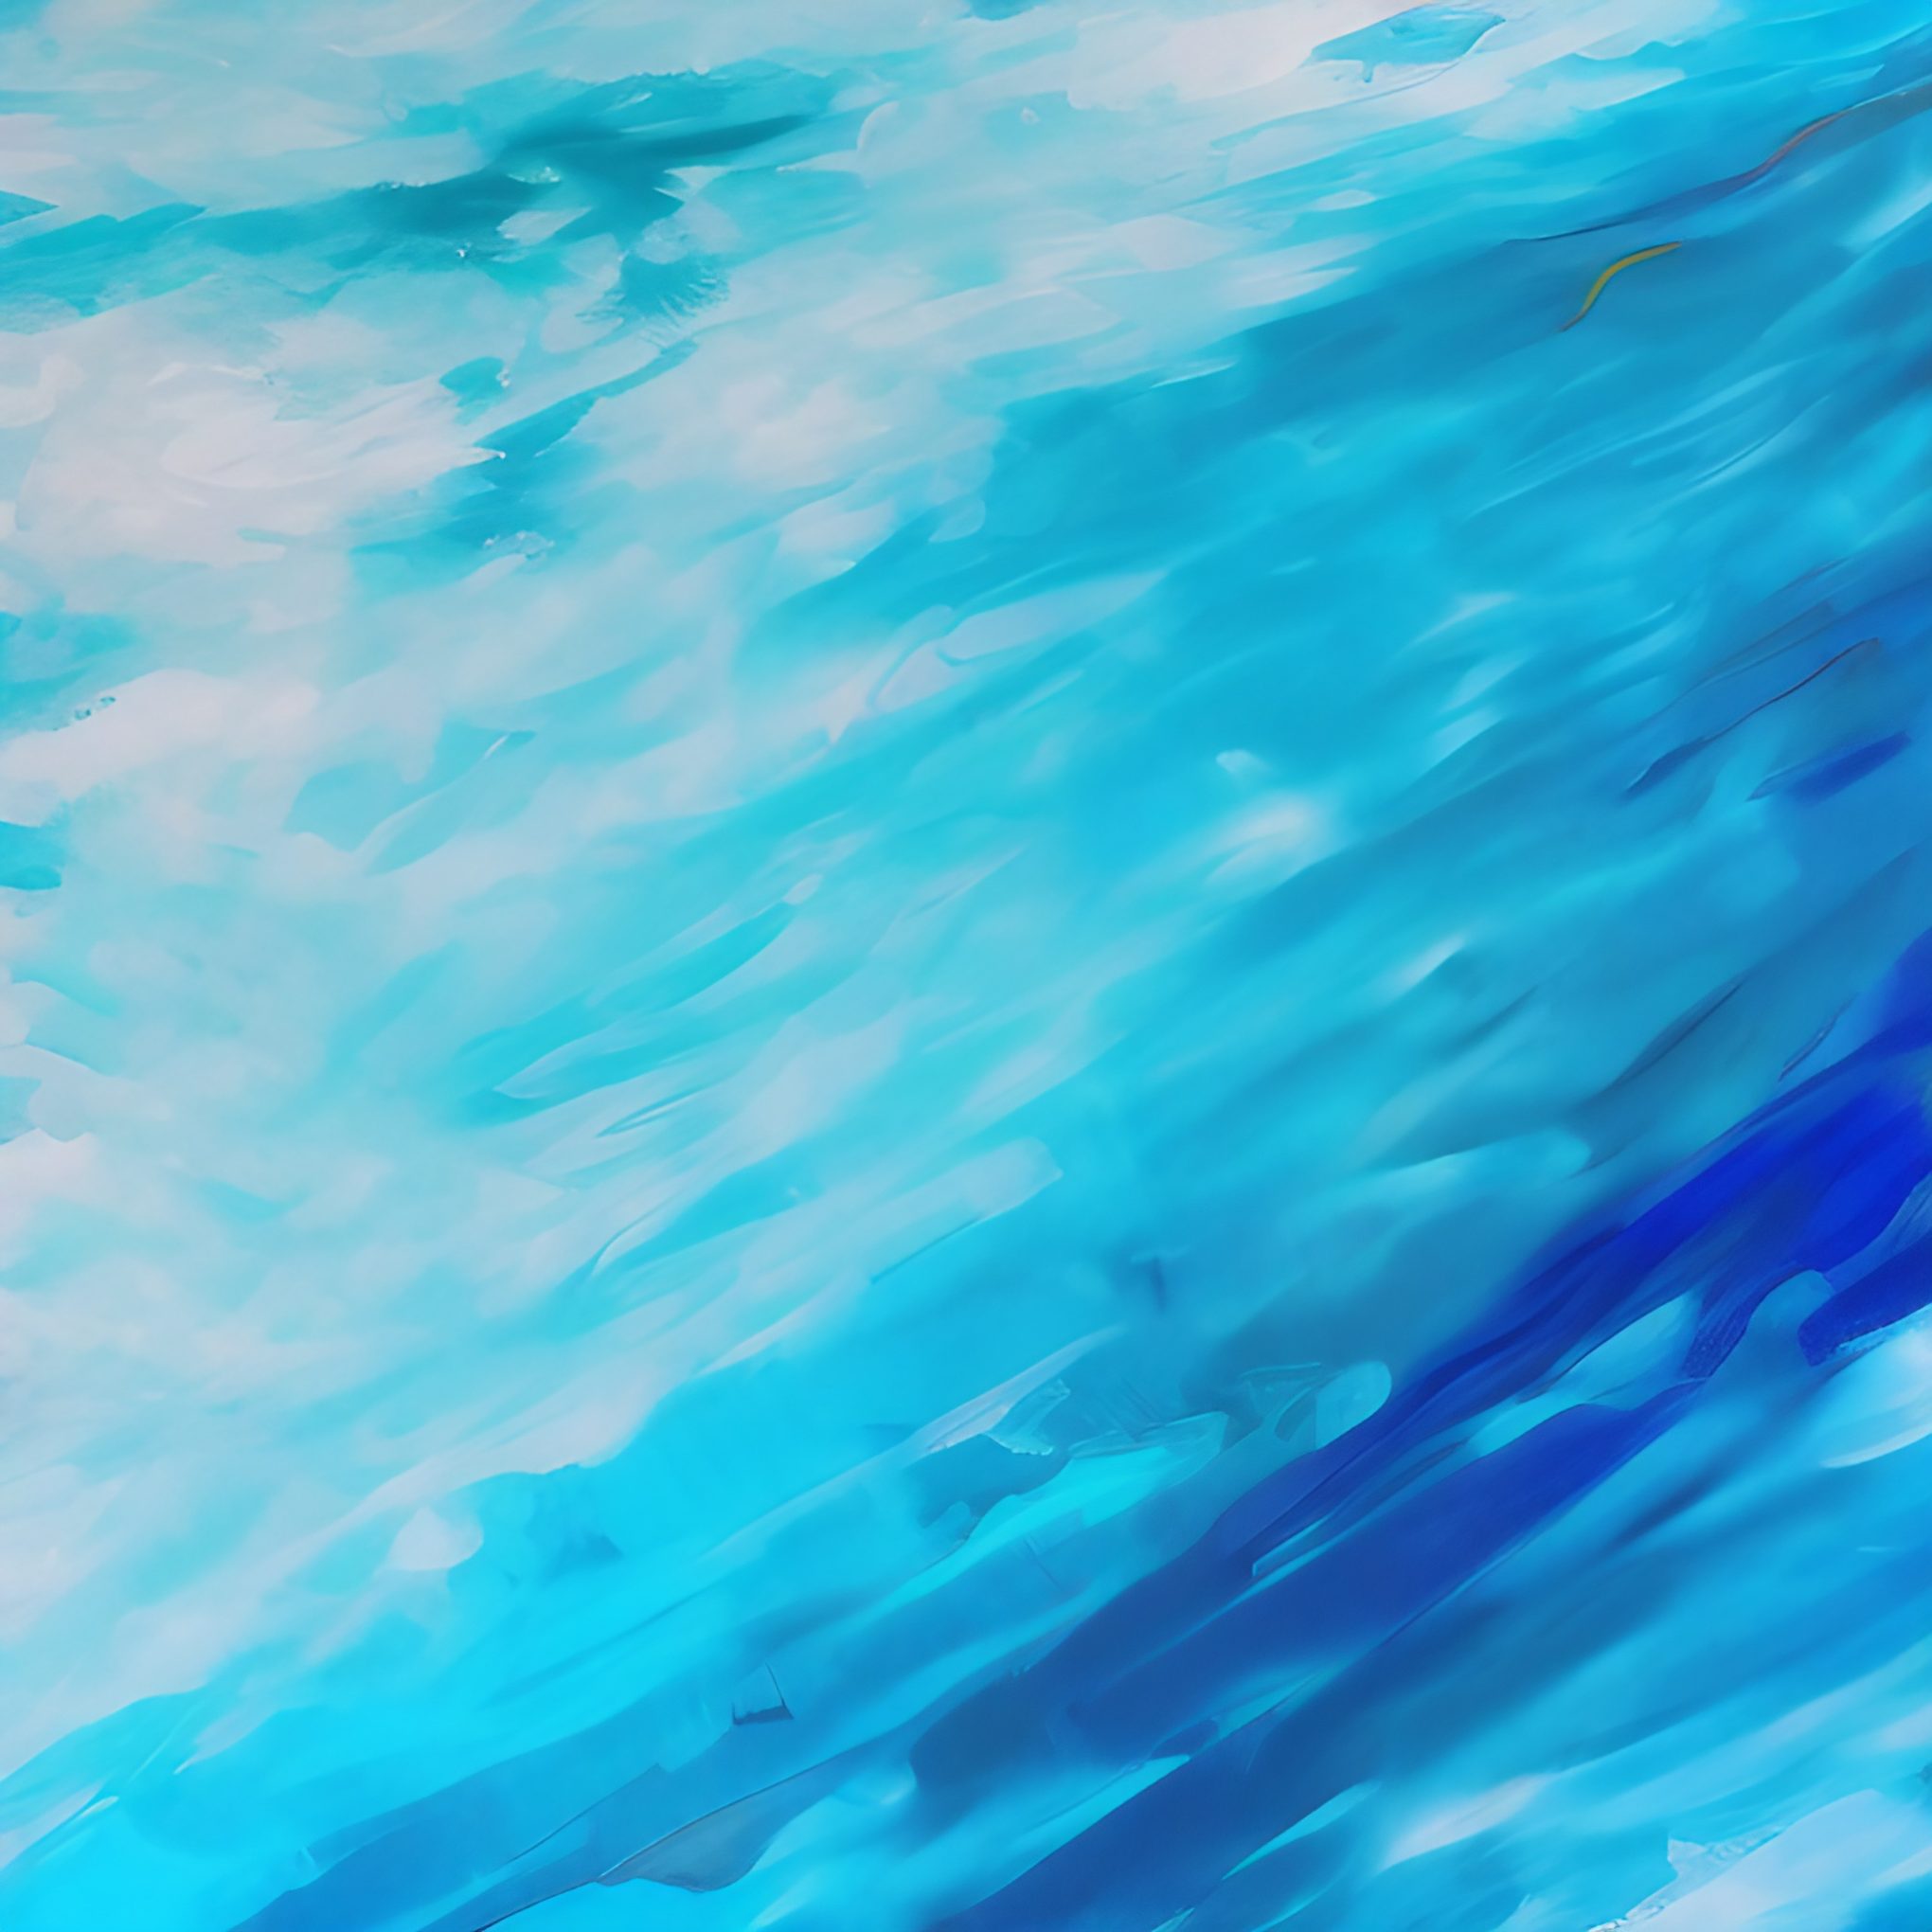 Blue Tones Acrylic Abstract Painted Texture Background Free Image Download